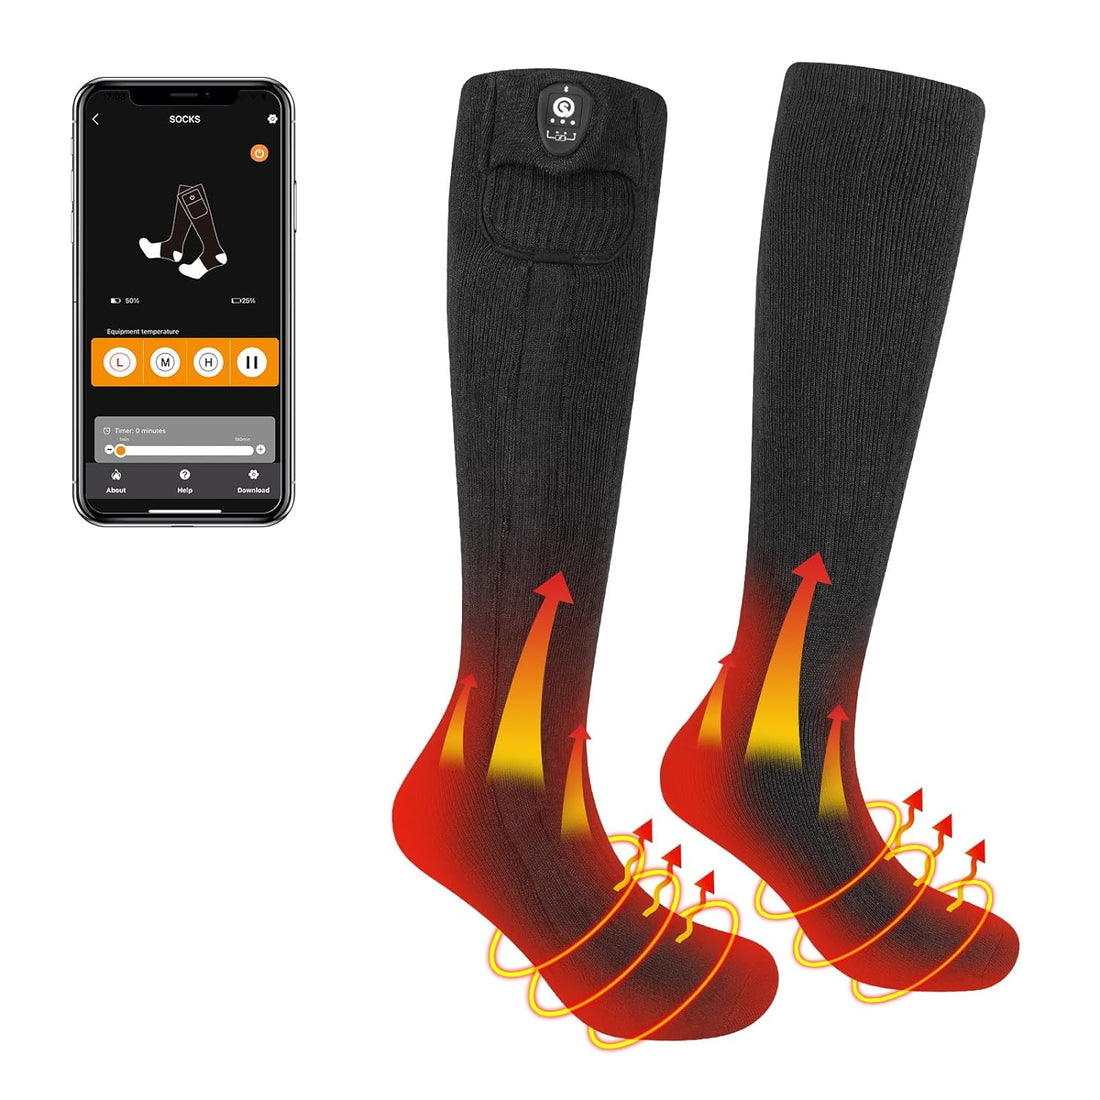 SAVIOR HEAT Heat Socks 2023 Upgraded - Rechargeable Electric Heated Socks with Bluetooth Control, 7.4V 2200mAh Battery, Cold Weather Warm Winter Socks for Men Women